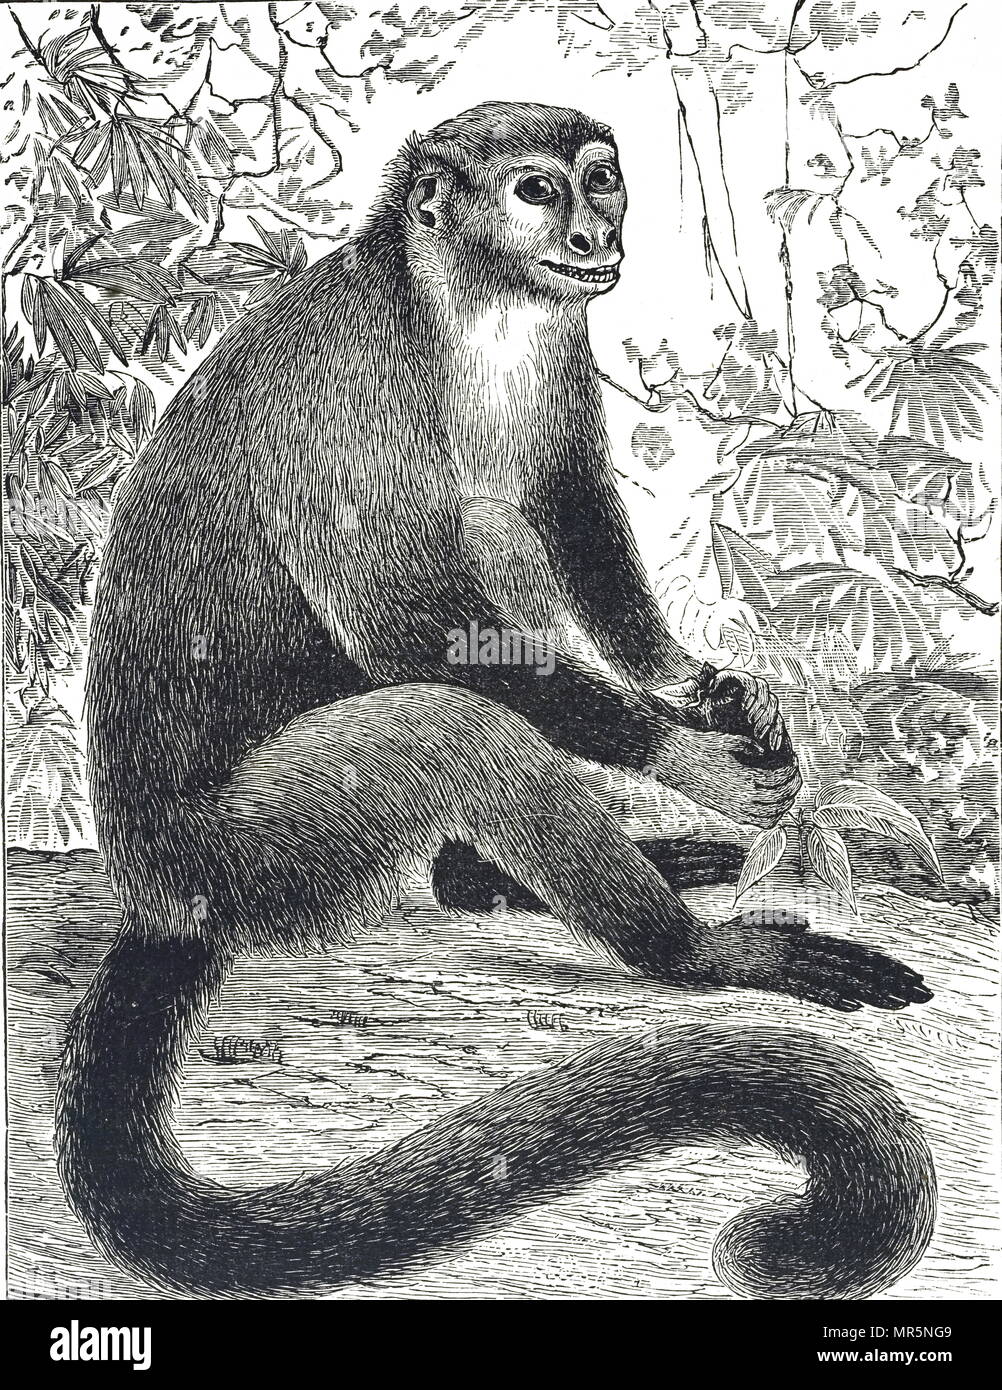 Engraving depicting a Marmoset monkey also known as zaris on display at London Zoo. London Zoo is the world's oldest scientific zoo, opened in 1828. Dated 19th century Stock Photo